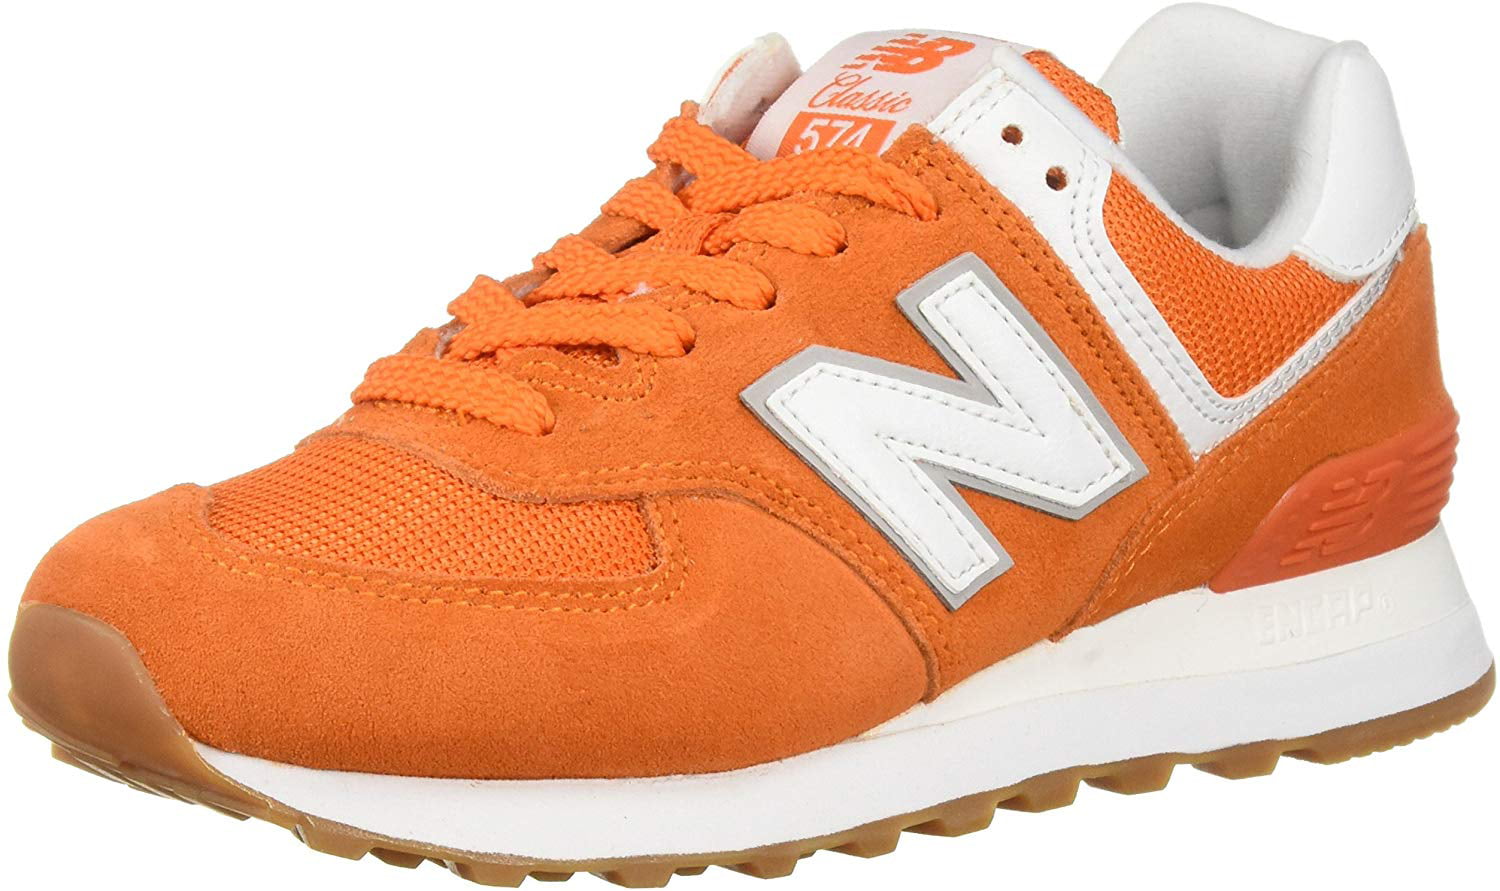 New Balance Womens 574v2 Sneaker Fashion Sneakers Shoes